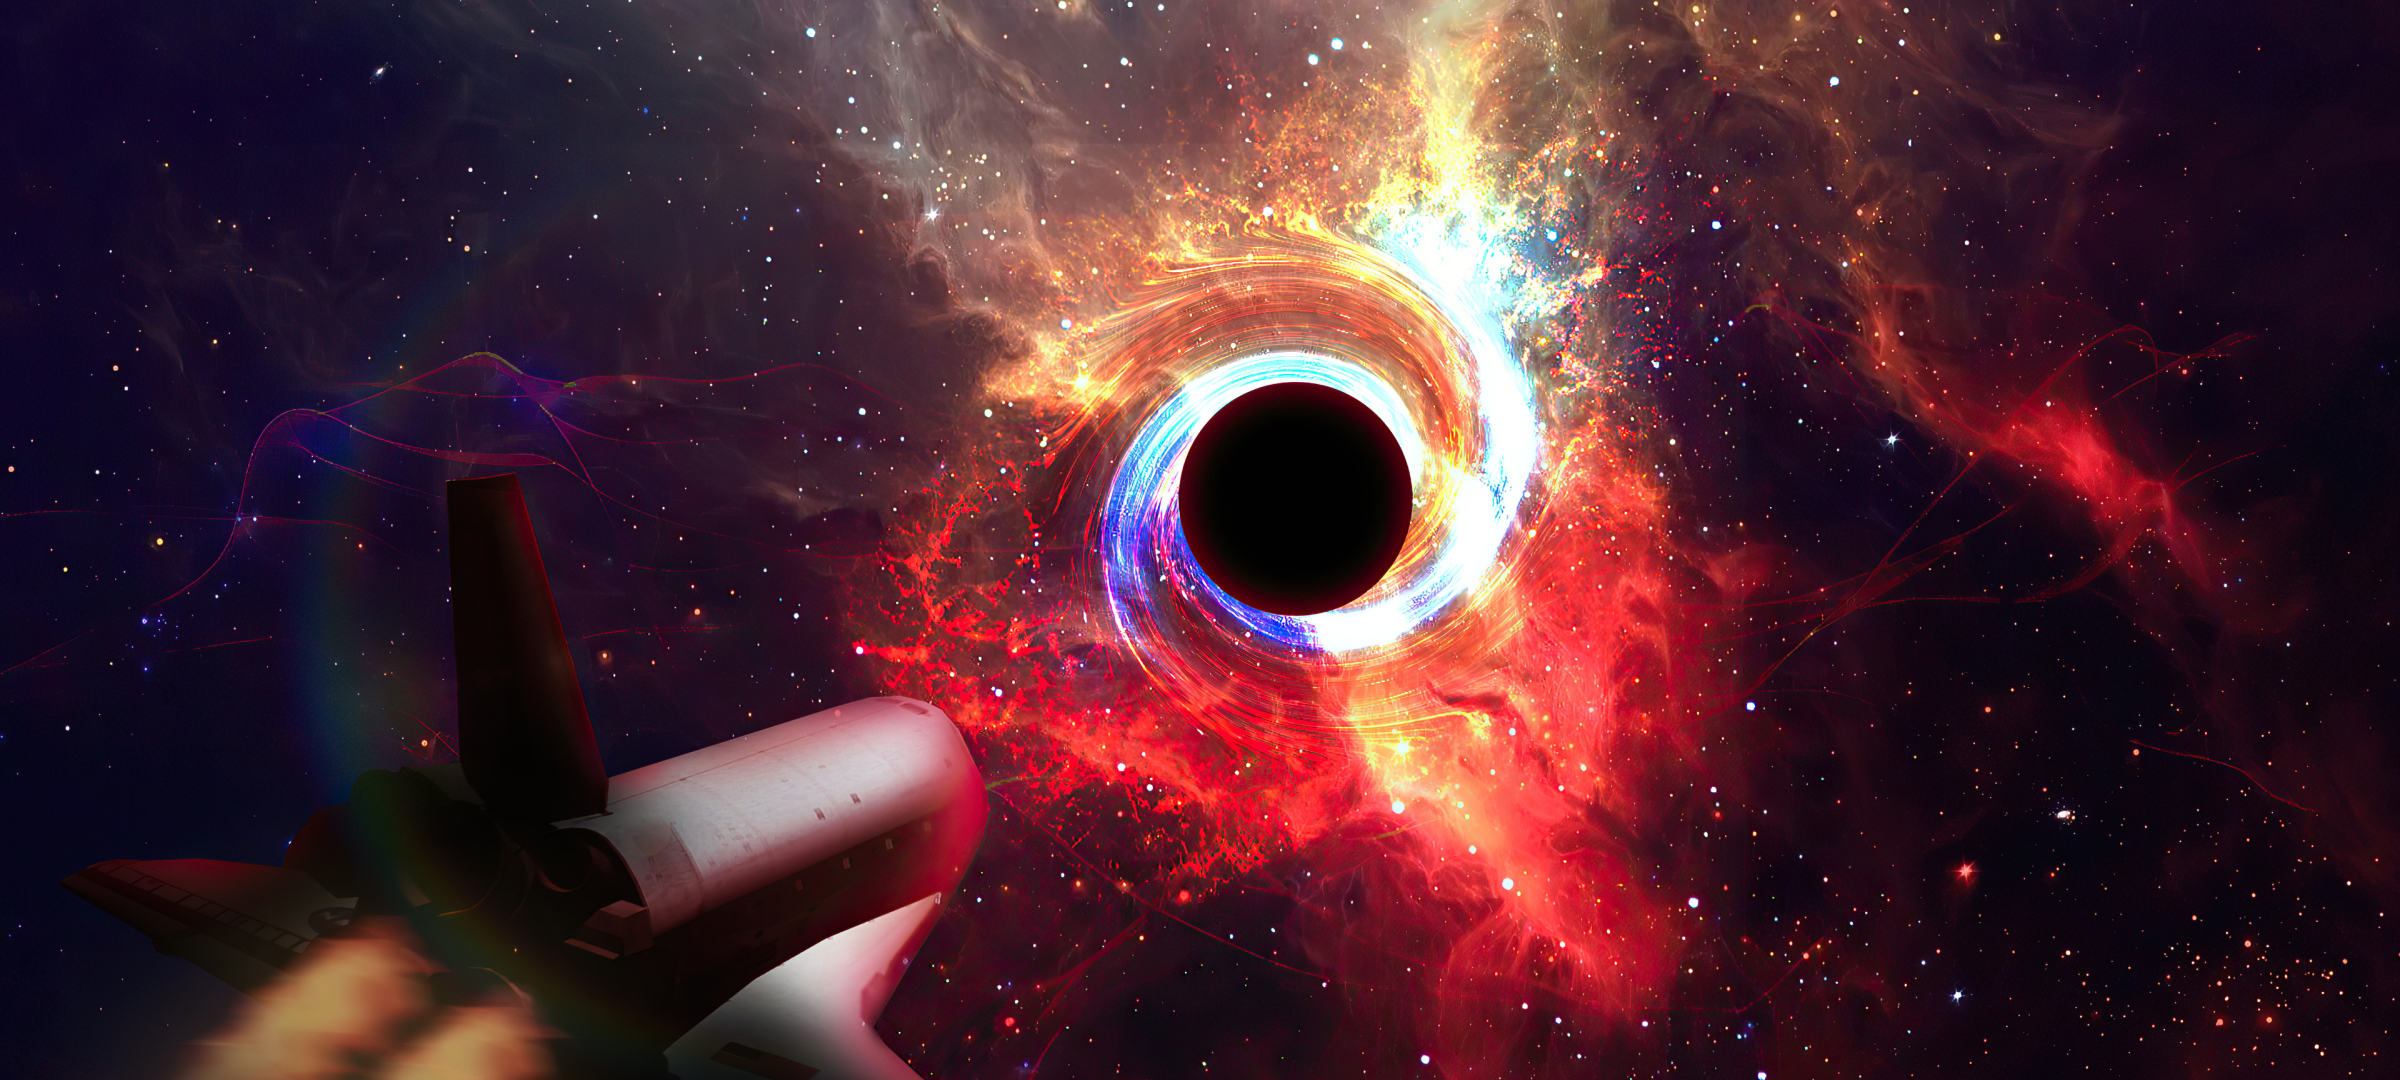 Black Hole Full HD, HDTV, 1080p 16:9 Wallpapers, HD Black Hole 1920x1080  Backgrounds, Free Images Download